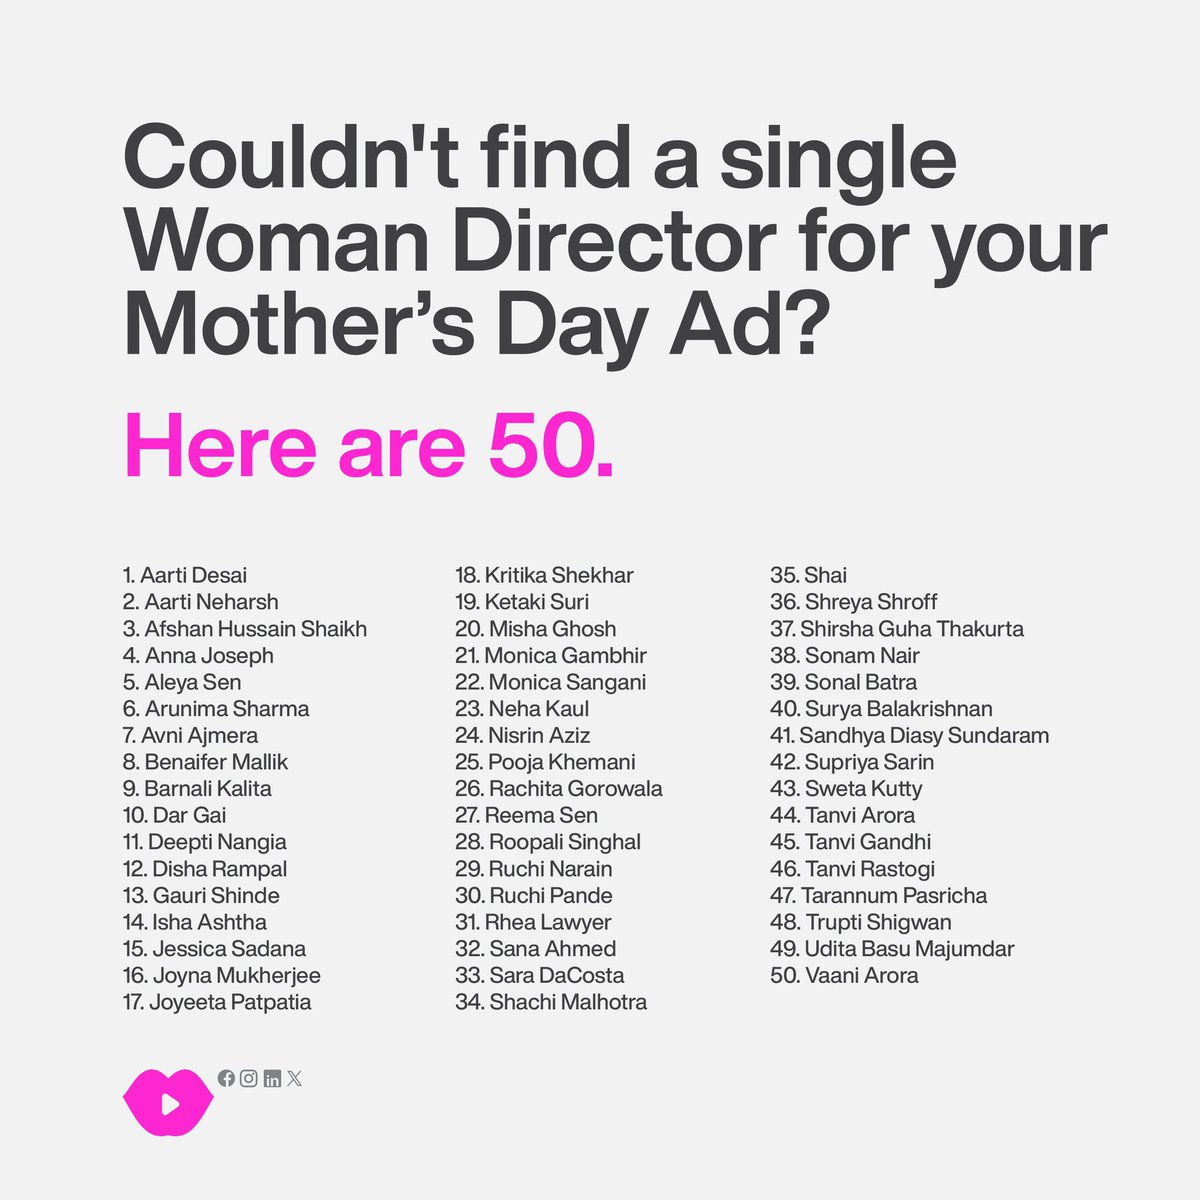 👩‍💼 Yo, all this talk about #womenpower , but where the action at? 💁‍♀️ Our feeds stuffed with ads for #MothersDay , but how many directed by women? 🎬 To those saying there ain’t enough, here’s a list. No excuses now. Make your momma proud! 🙌 #freethework @cindygallop @Almaharel